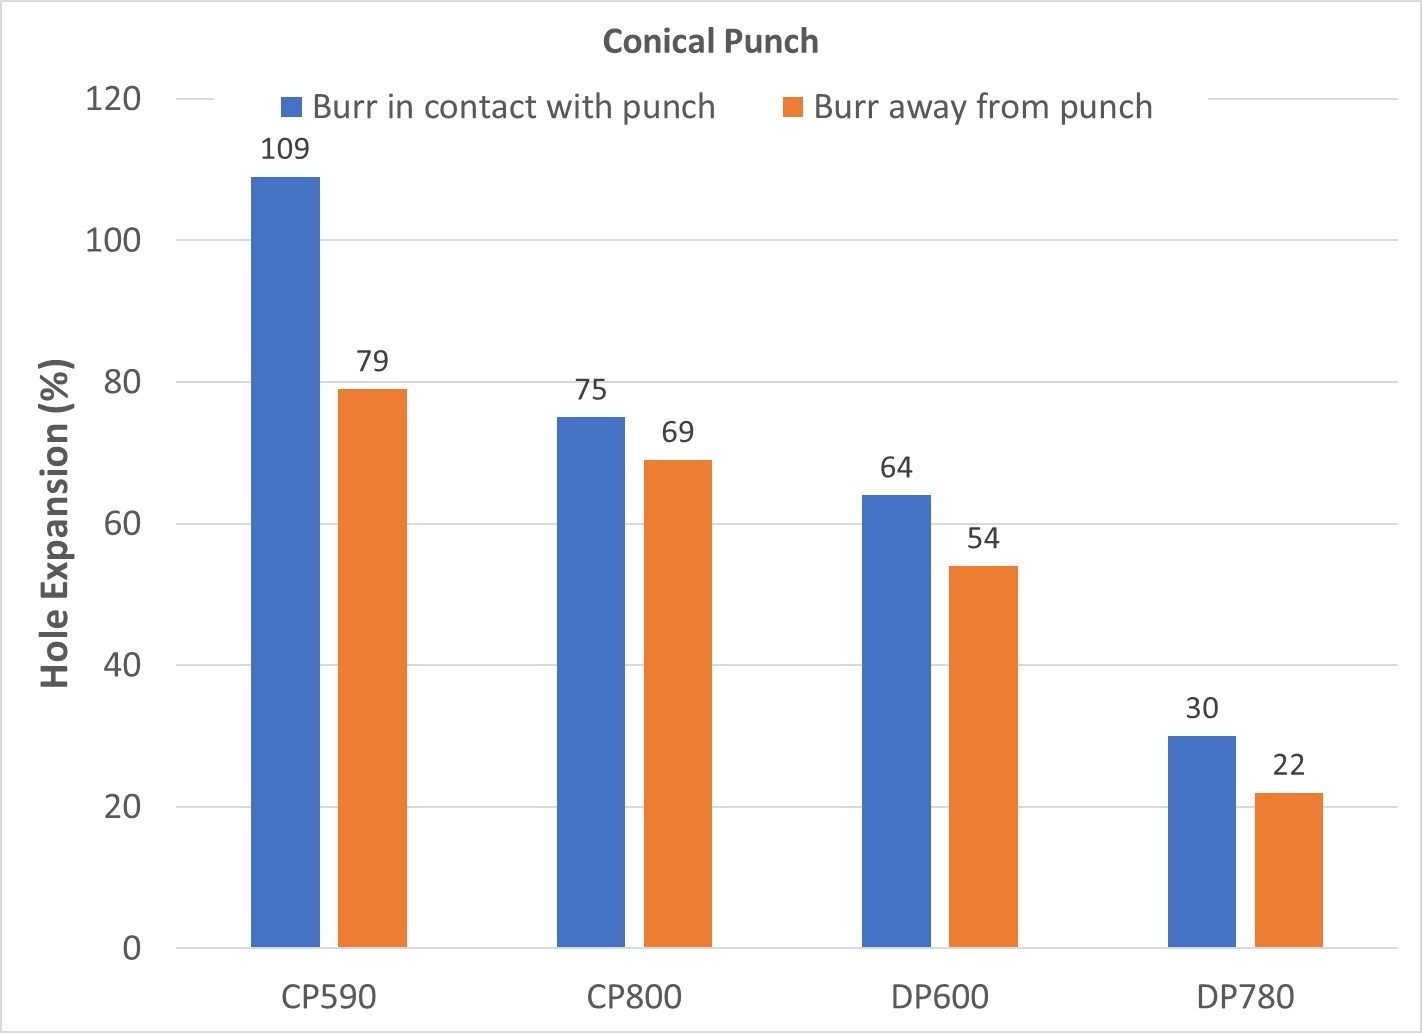 Figure 12: Effect of Burr Orientation on Hole Expansion from a Conical Punch. (Based on Data from Citation P-13.)